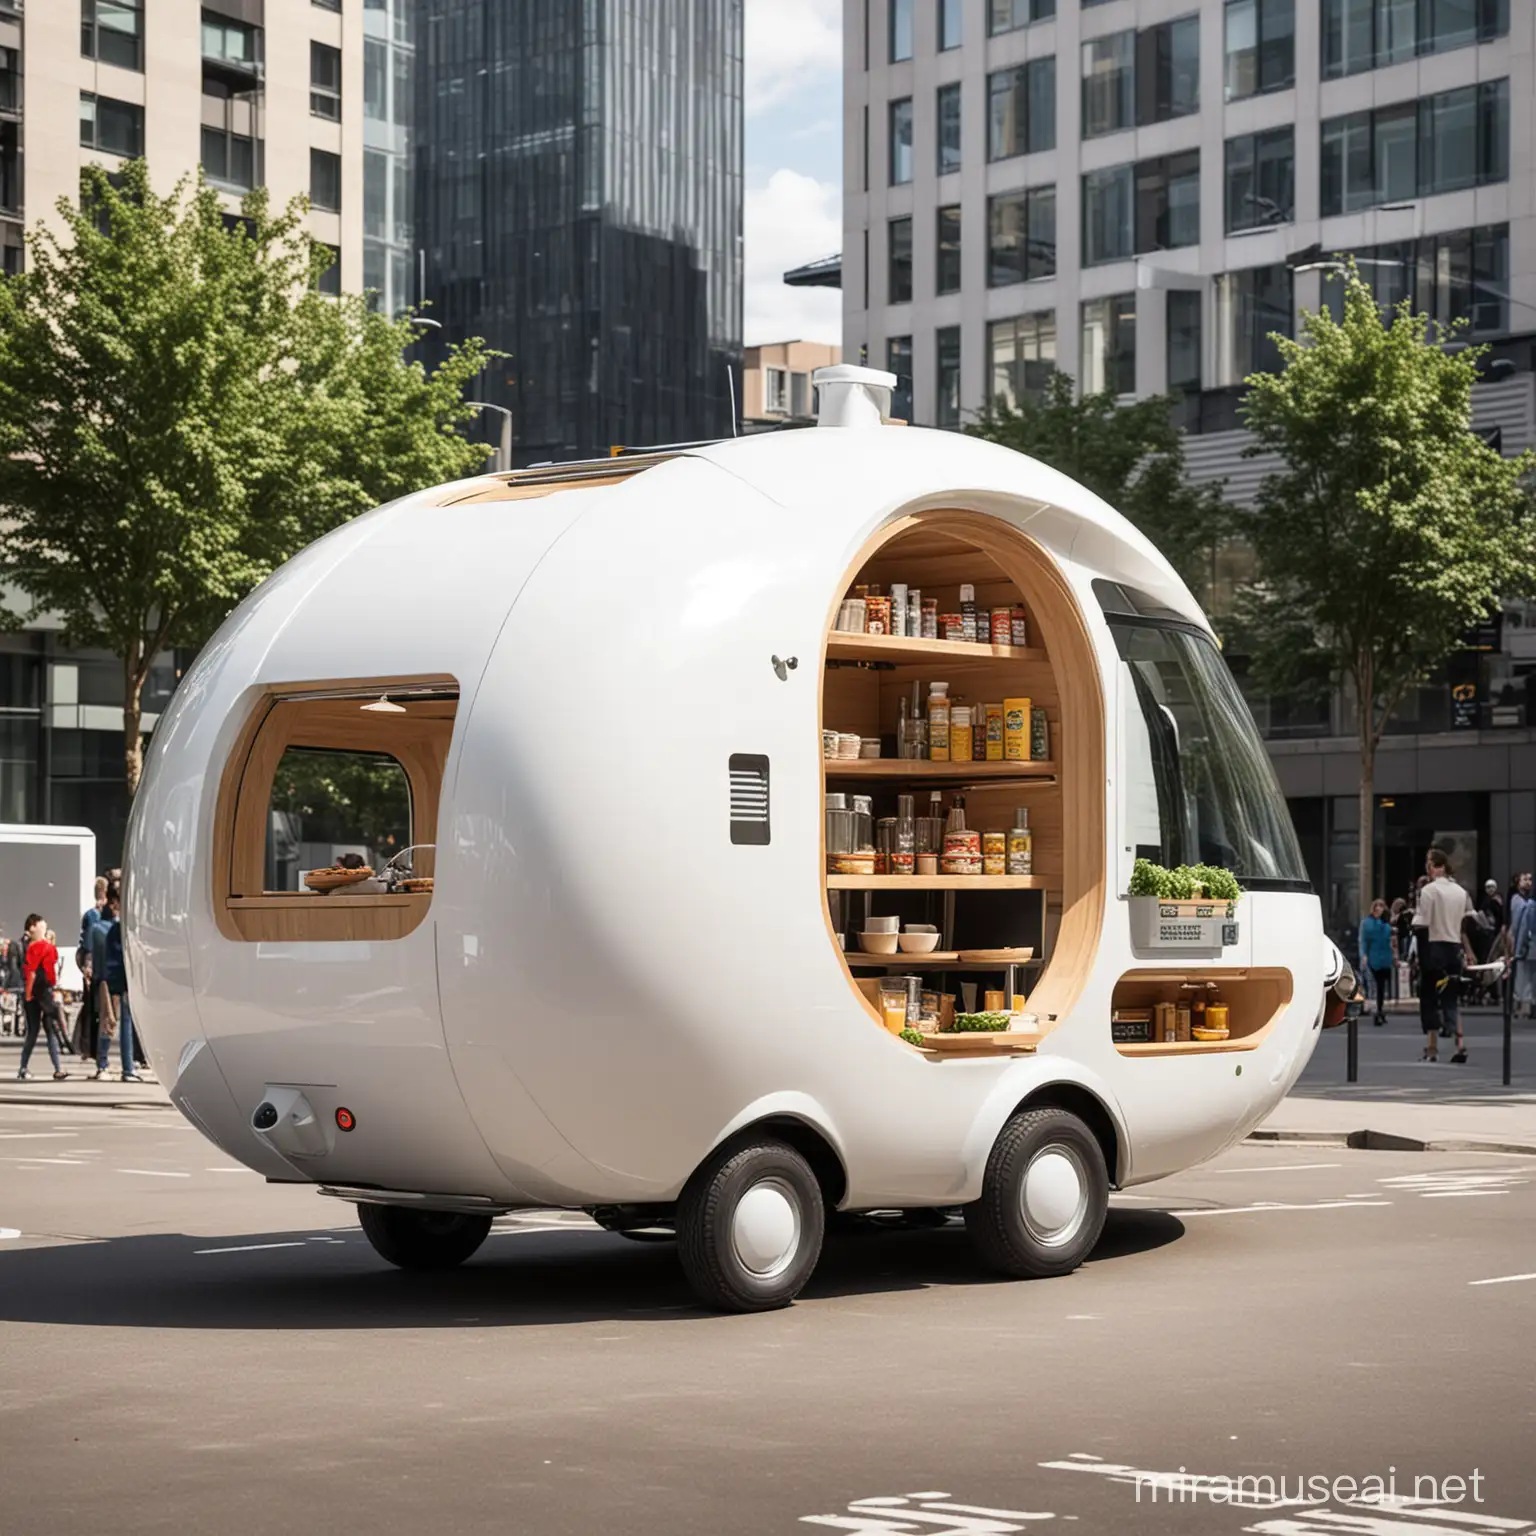 A futuristic mobile food pod which is mobile and small